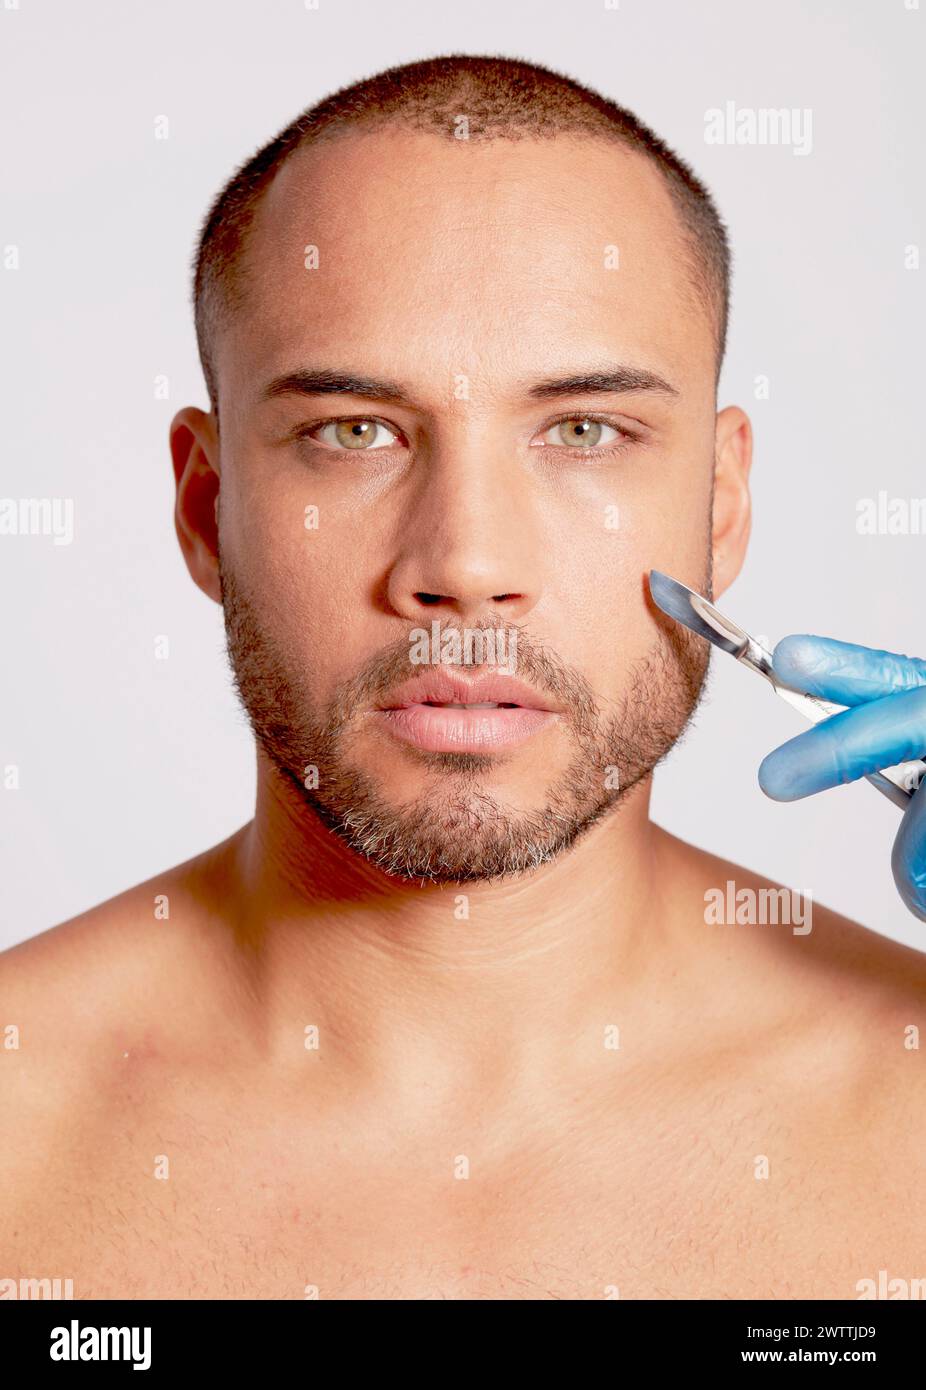 Man receiving cosmetic injection Stock Photo